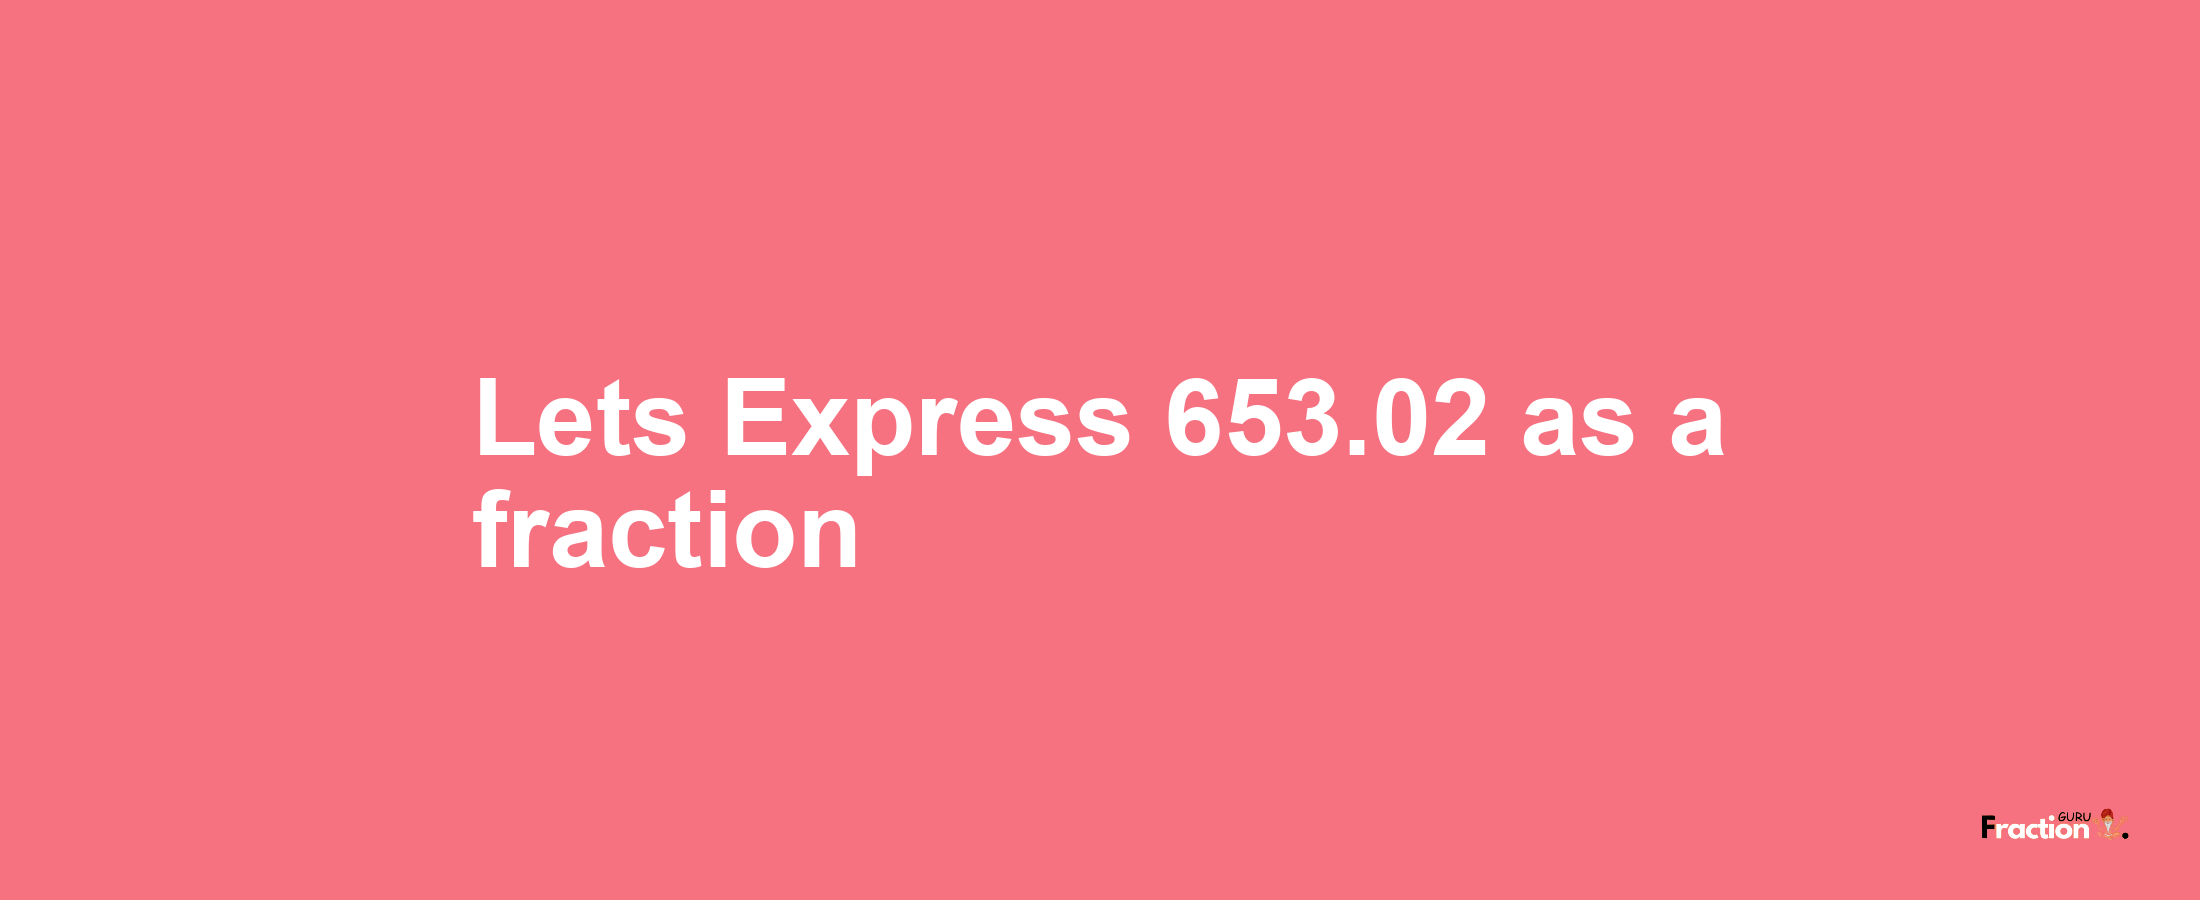 Lets Express 653.02 as afraction